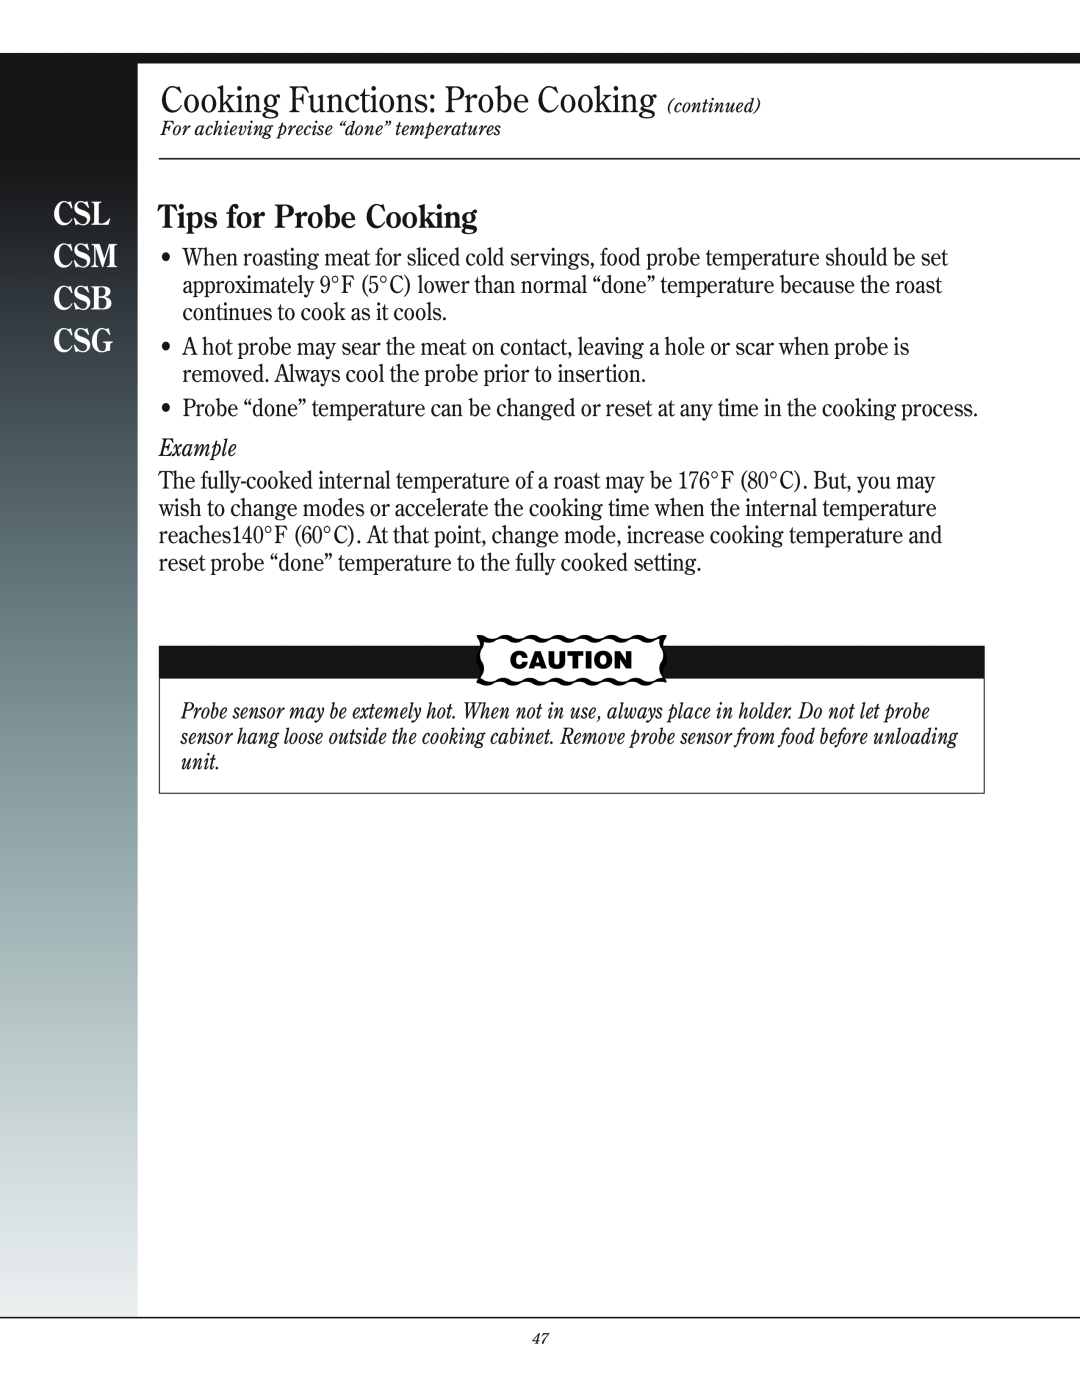 Henny Penny CSG manual Cooking Functions Probe Cooking continued, Tips for Probe Cooking, Example, Csl Csm Csb Csg 